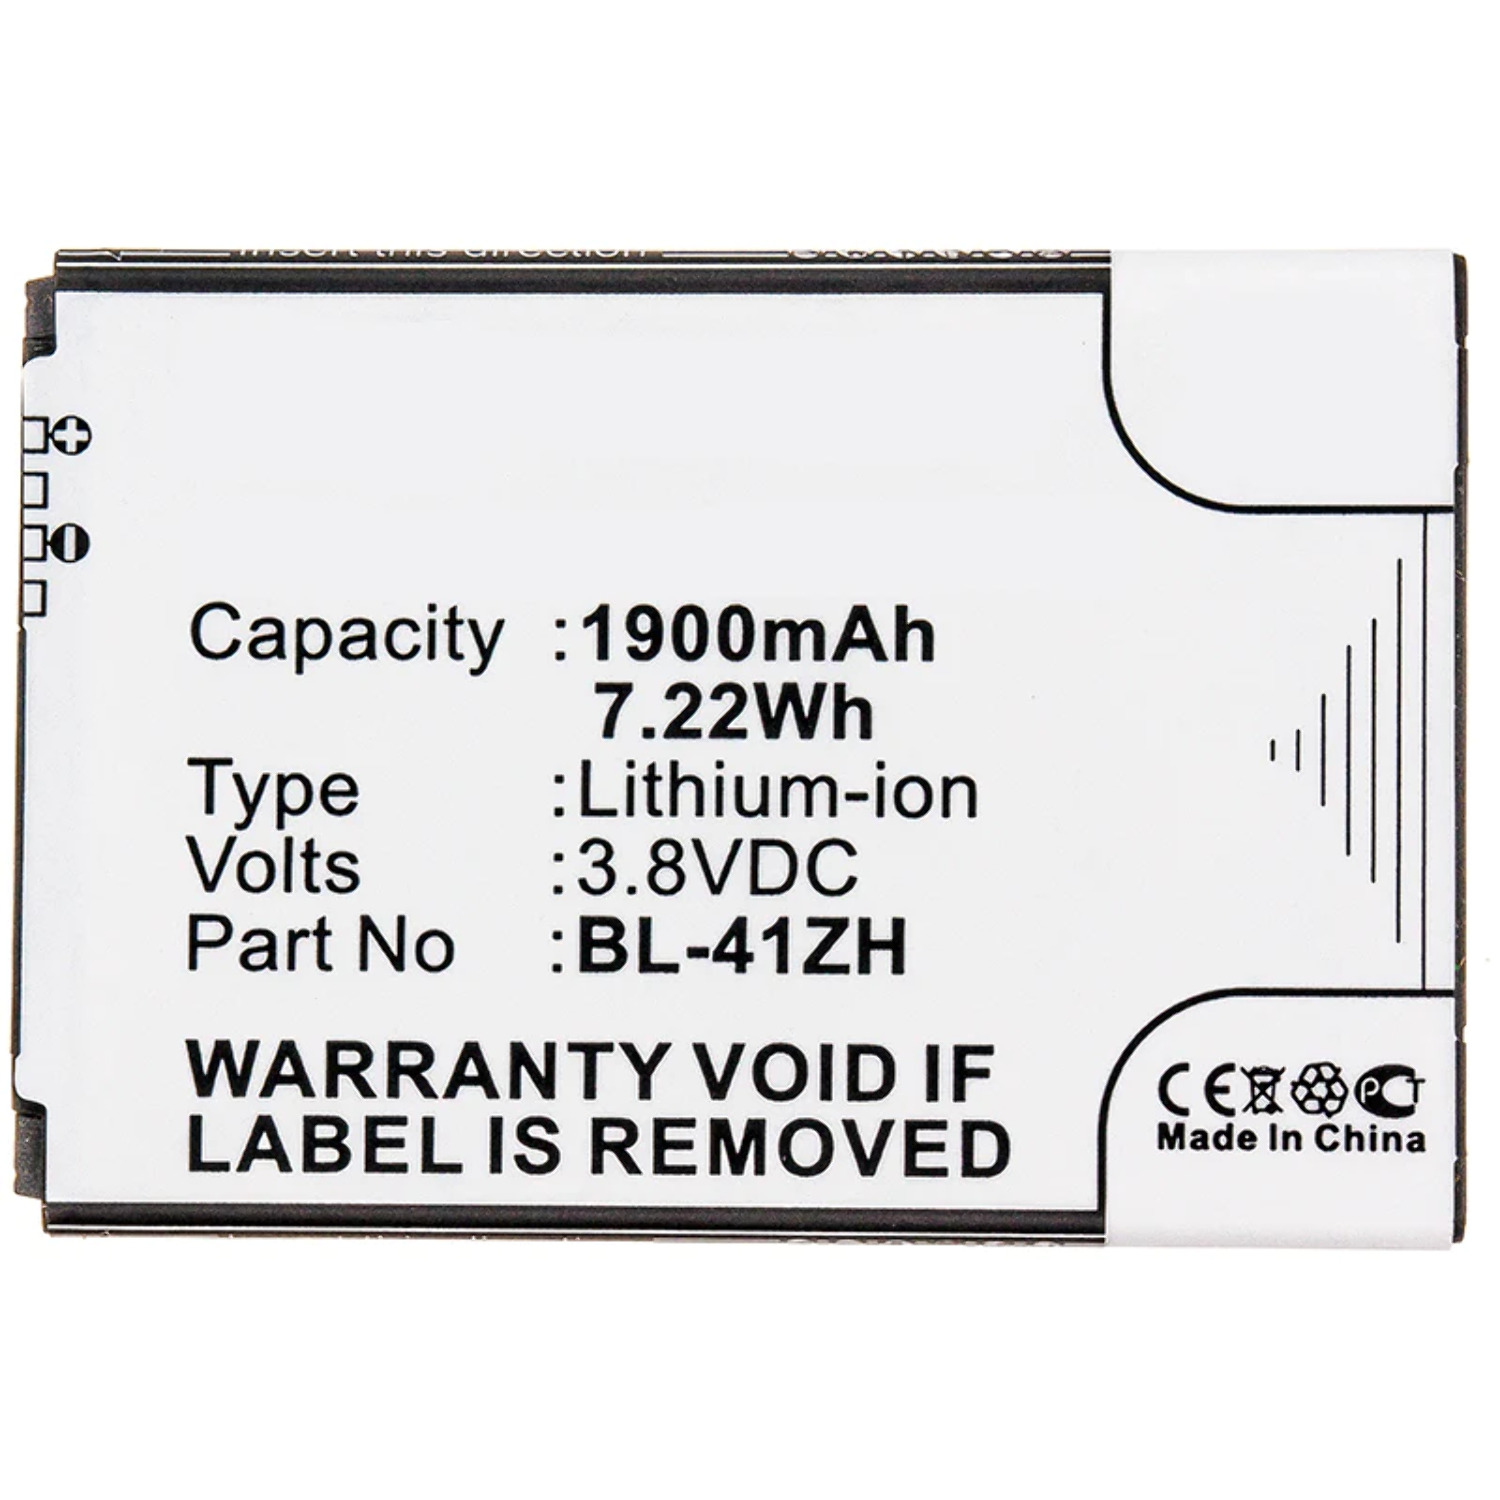 Batteries N Accessories BNA-WB-L3853 Cell Phone Battery - Li-ion, 3.8, 1900mAh, Ultra High Capacity Battery - Replacement for LG BL-41ZH, BL-41ZHB, EAC62378407 Battery - image 1 of 2